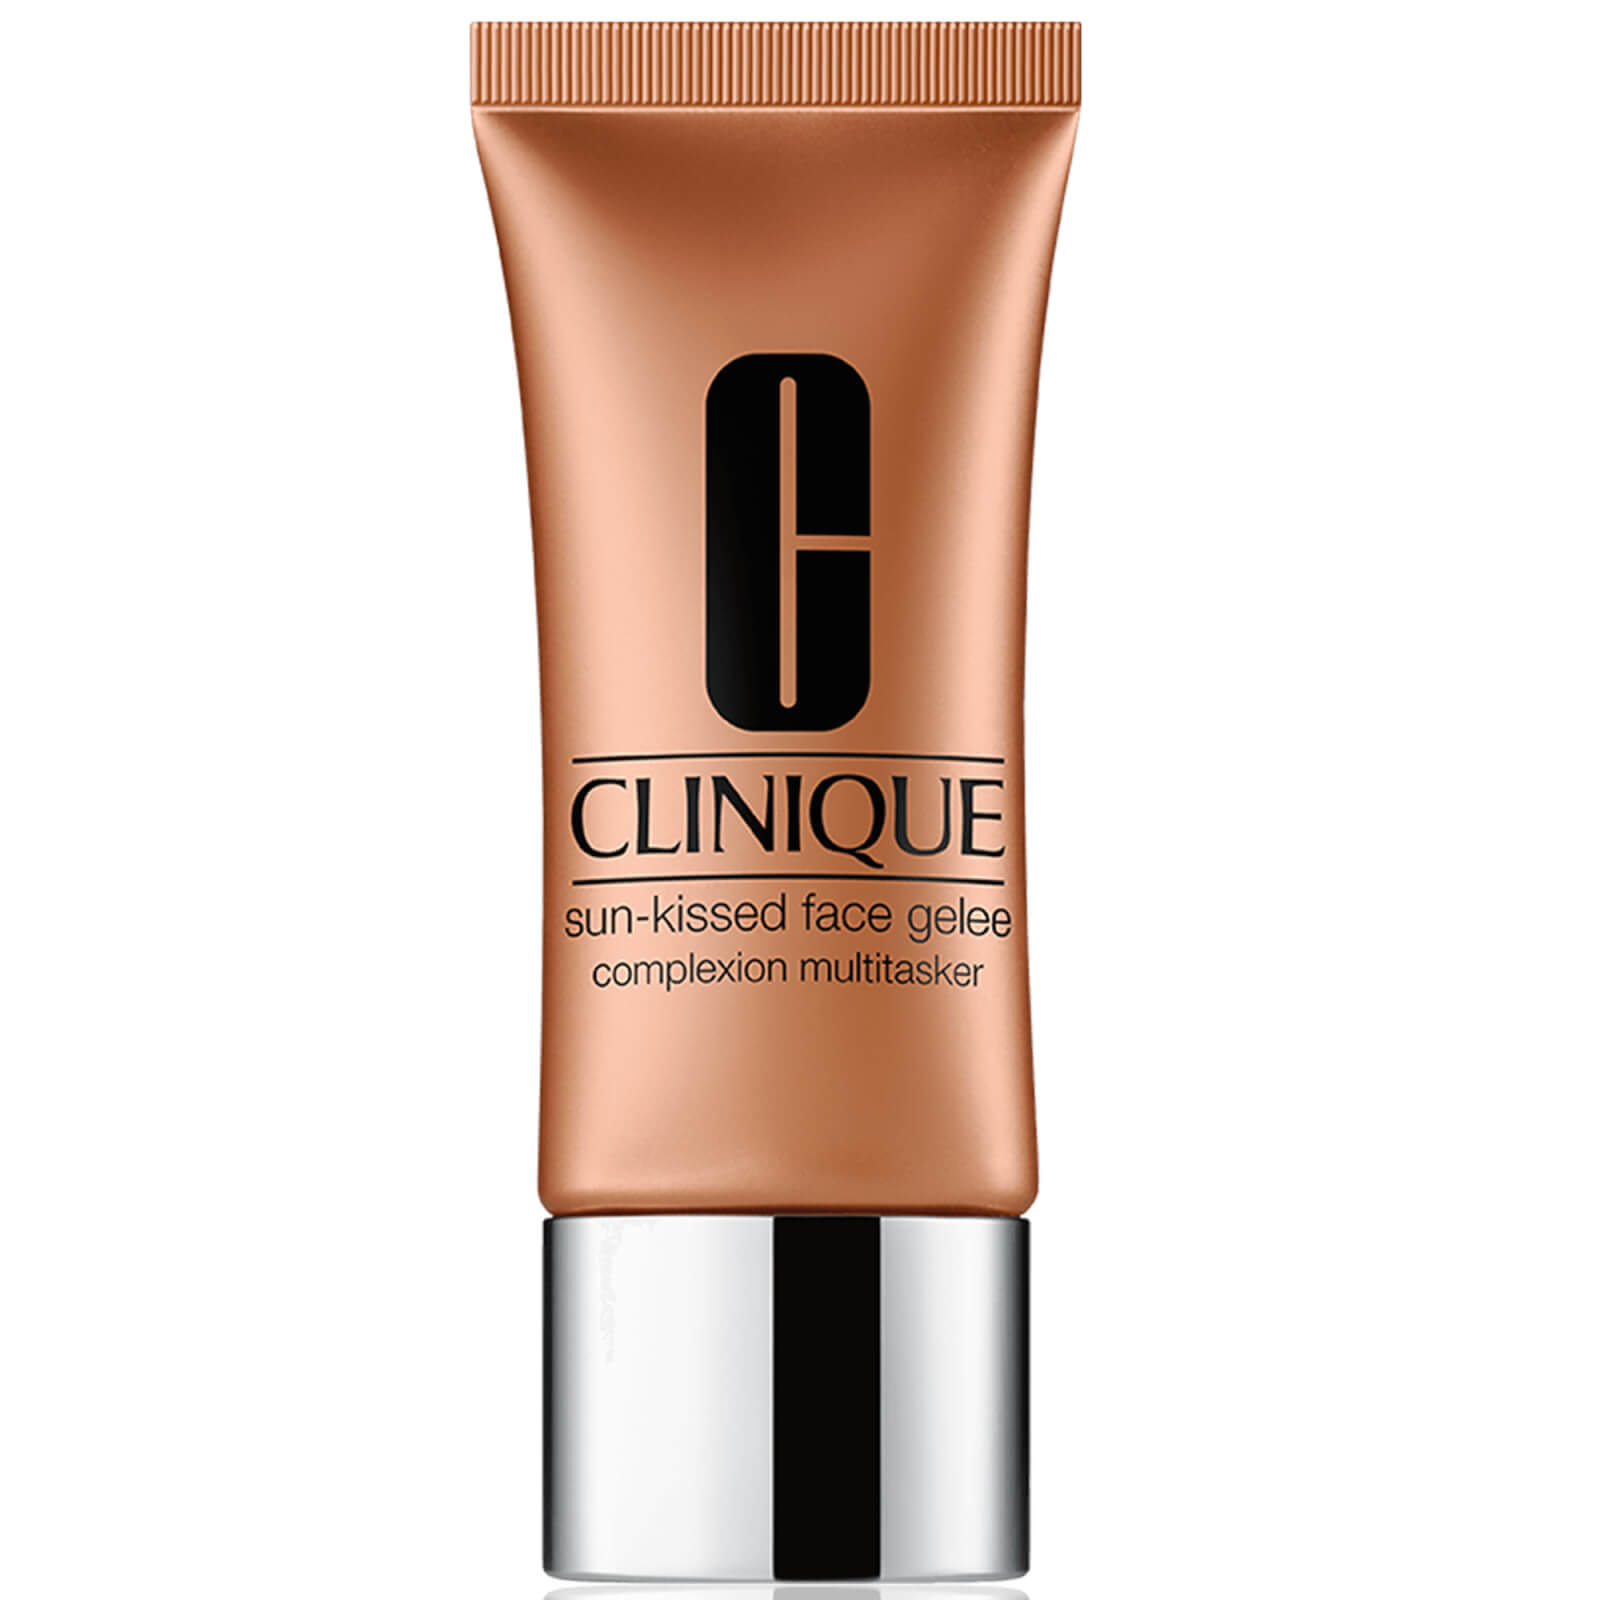 Photos - Other Cosmetics Clinique Sun-Kissed Face Gelee Complexion Multitasker Universal Glow ZMAT0 